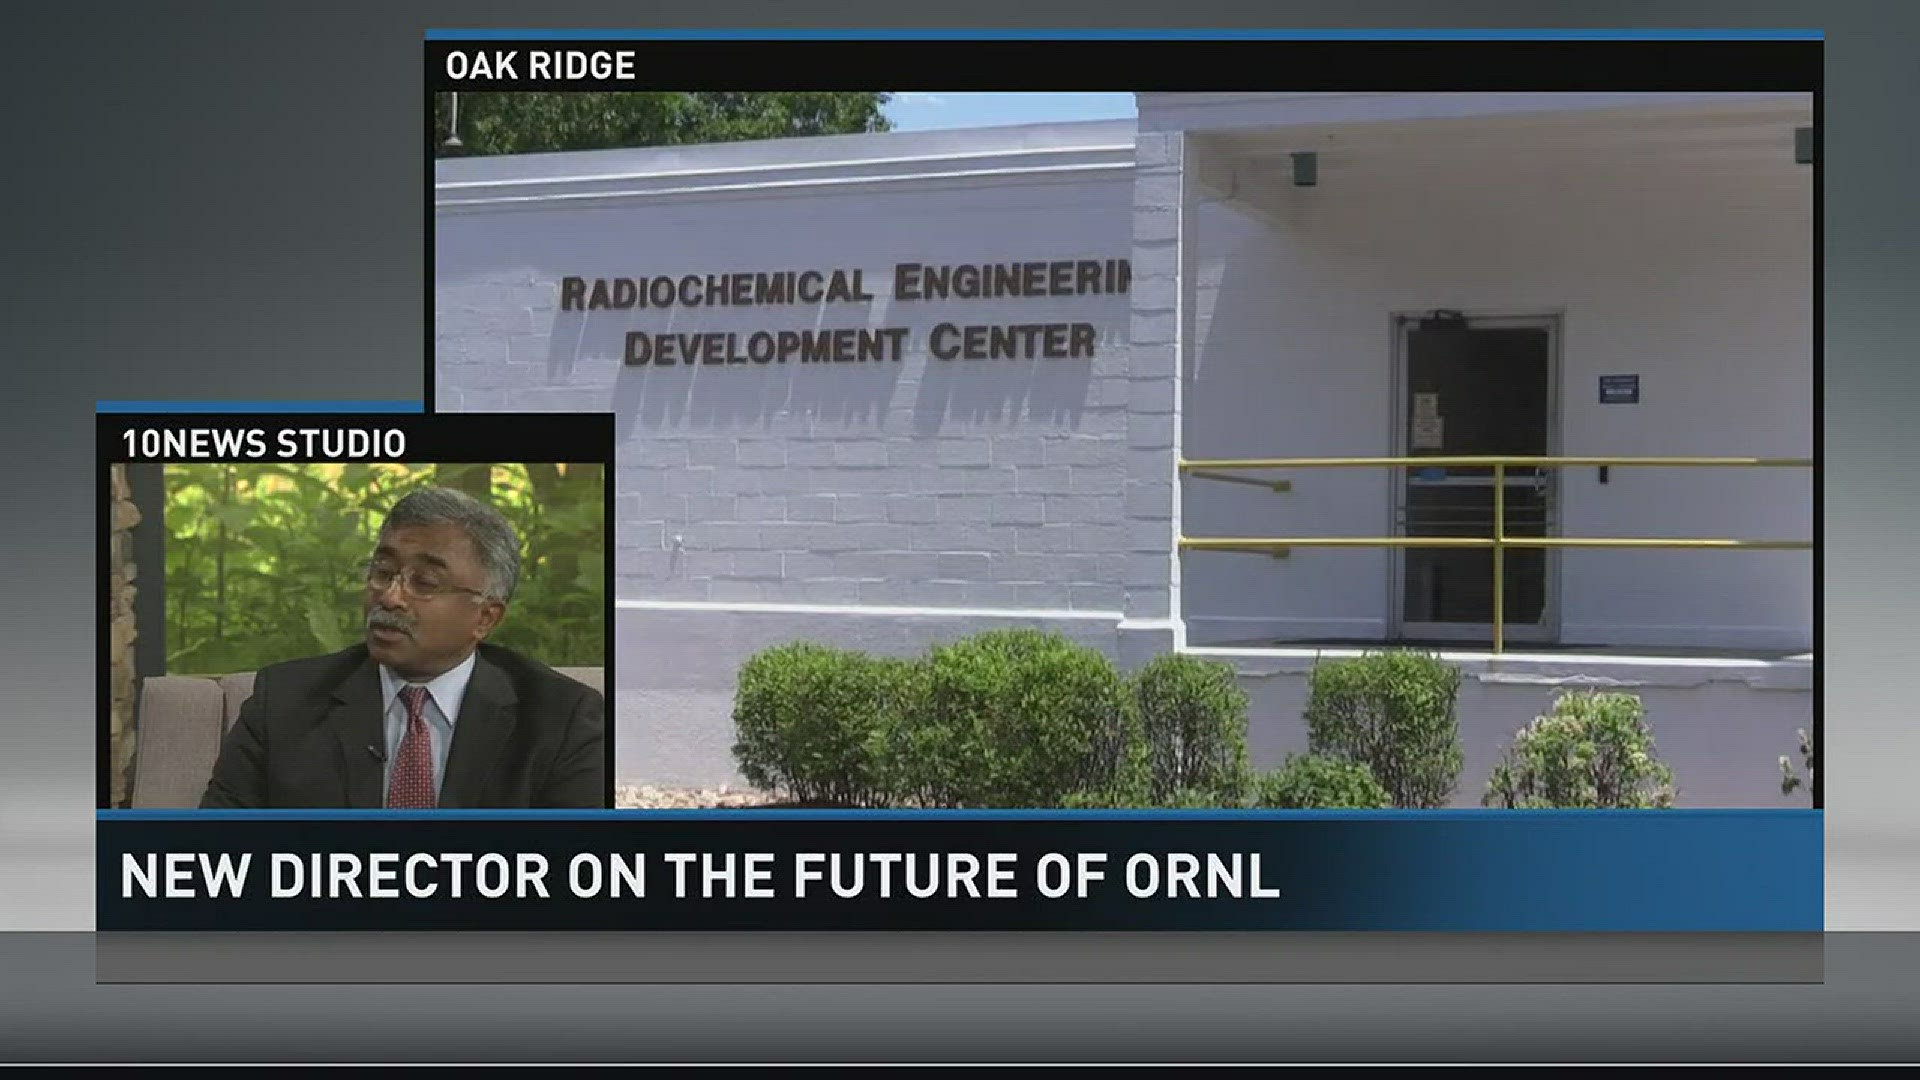 June 12, 2017: Dr. Thomas Zacharia, the new director of Oak Ridge National Laboratory, speaks about his new role and the future of ORNL.